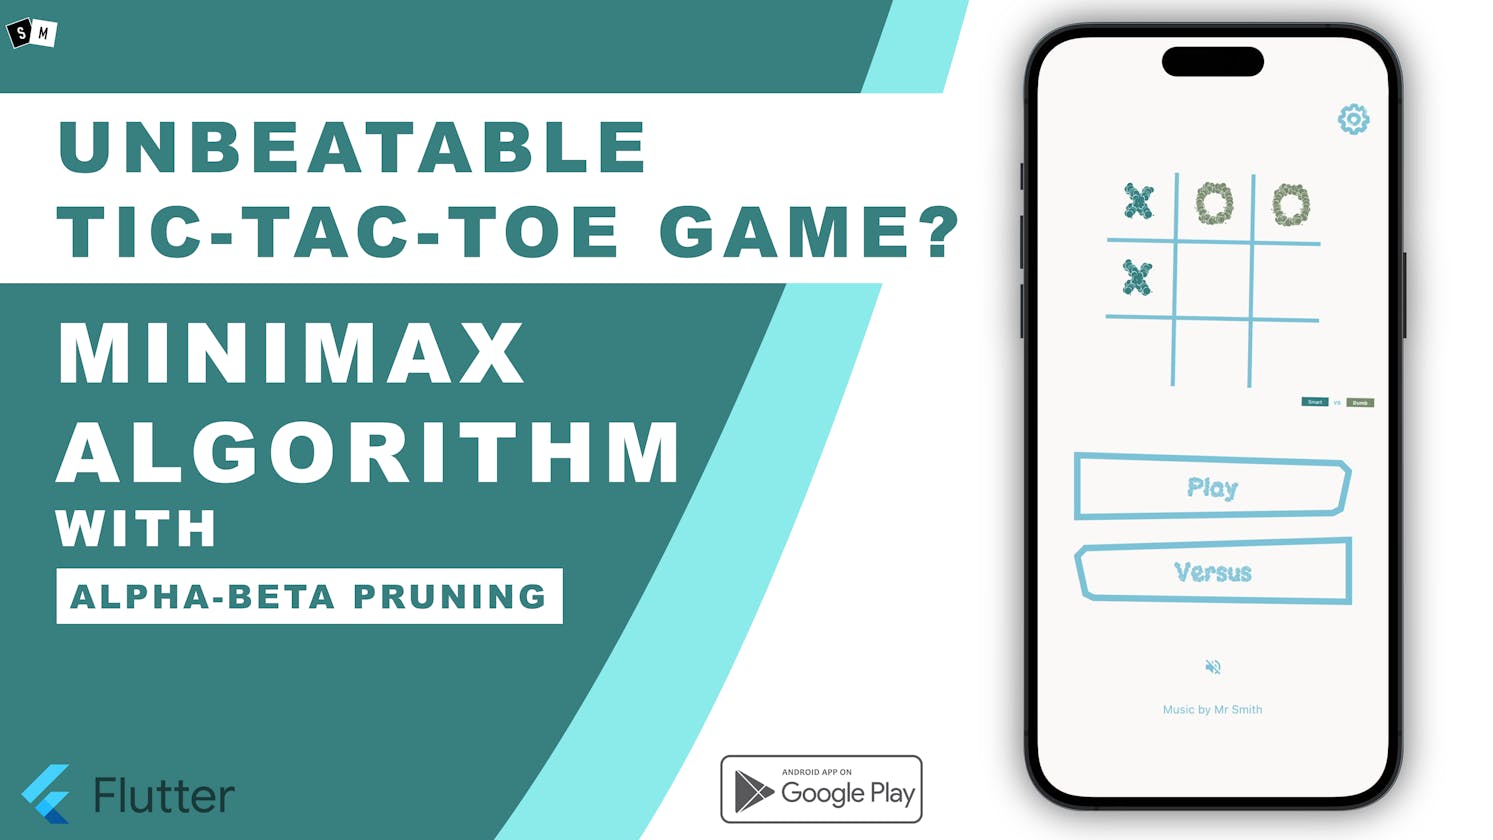 Creating Unbeatable TicTacToe Game in Flutter using Minimax Algorithm with Alpha Beta Pruning